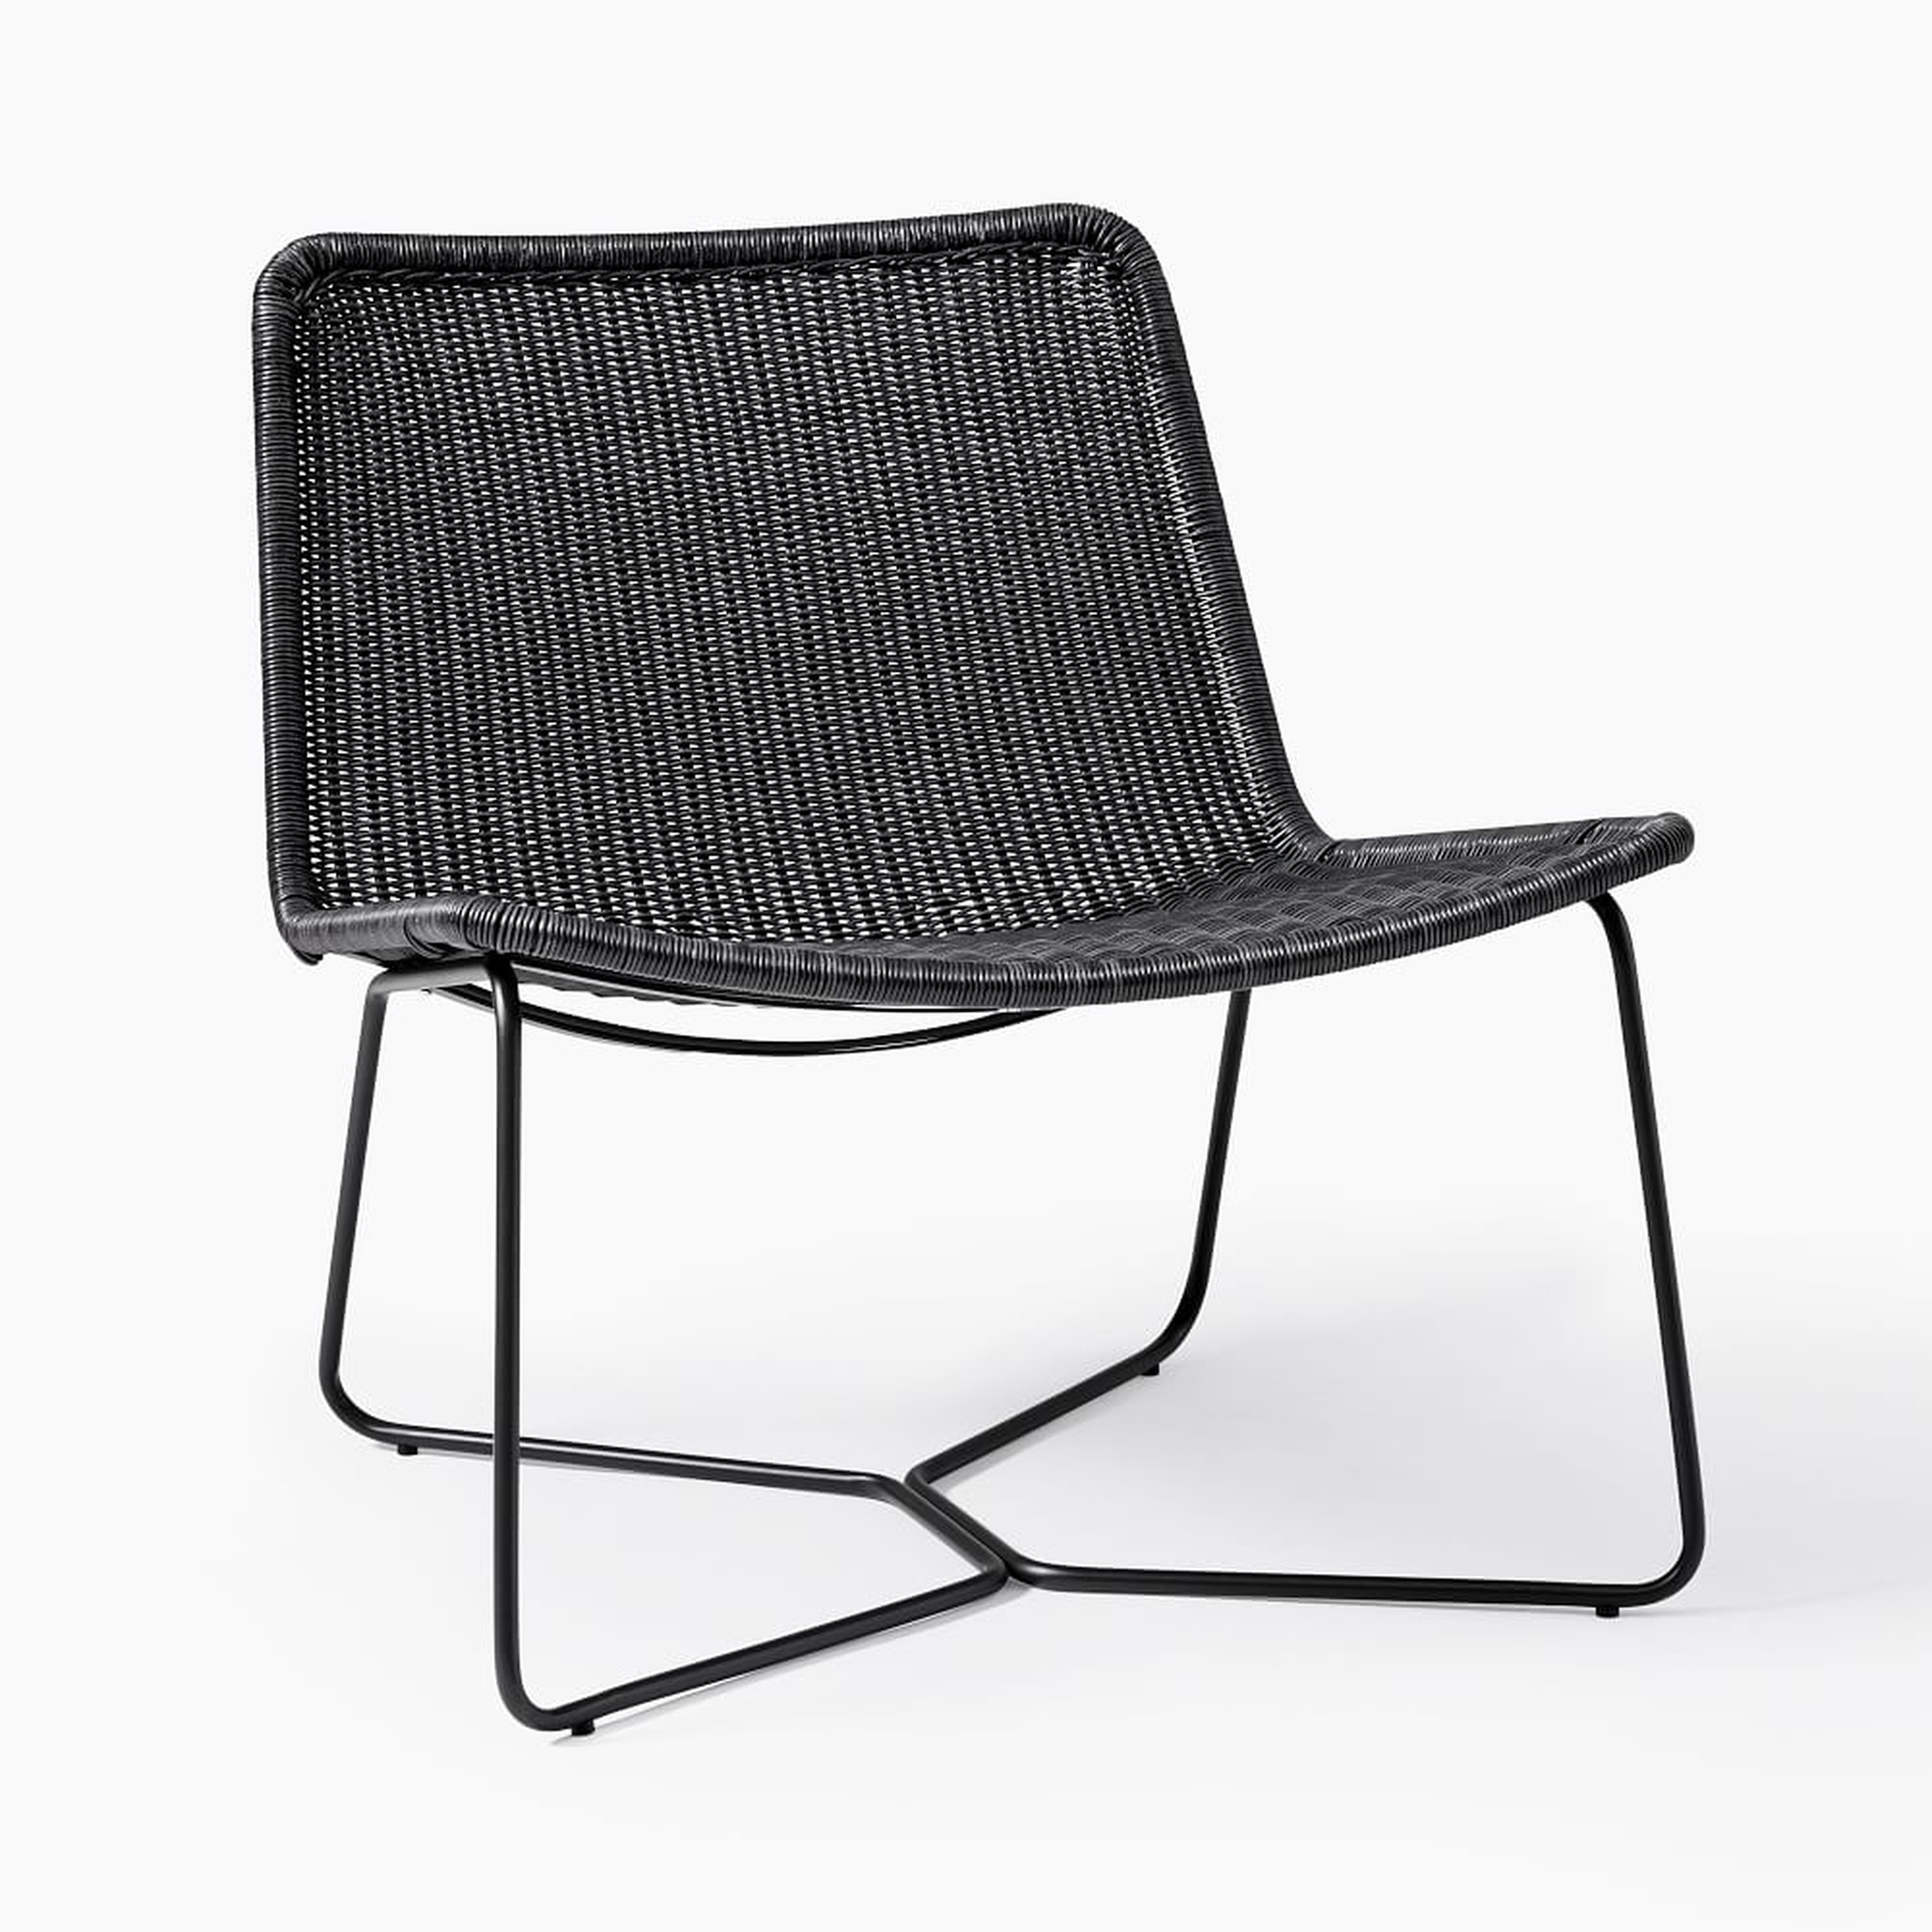 Outdoor Slope Collection Charcoal Lounge Chair - West Elm